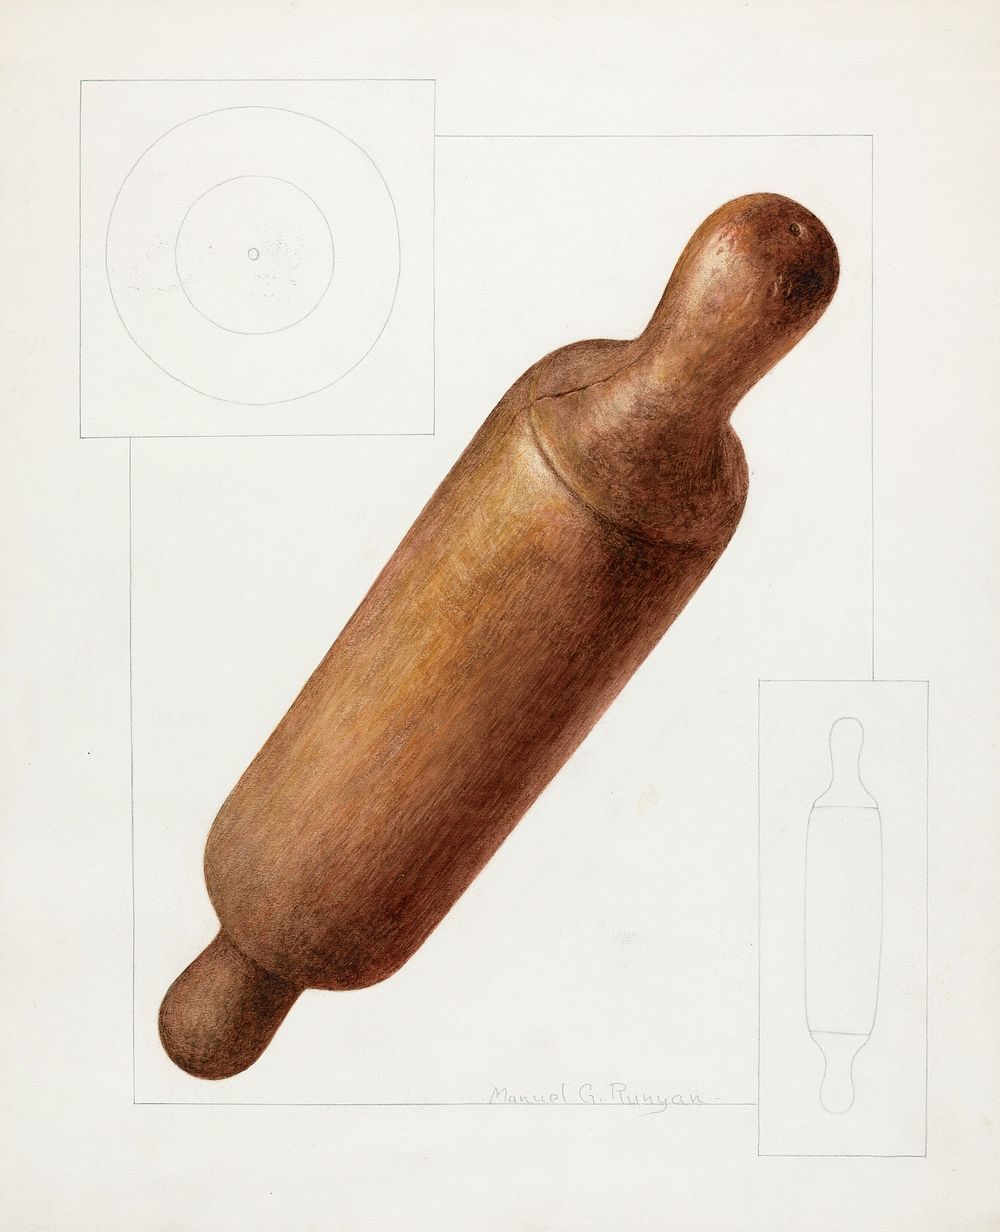 Dough Rolling Pin (ca. 1937) by Manuel G. Runyan. Original from The National Gallery of Art. Digitally enhanced by rawpixel.